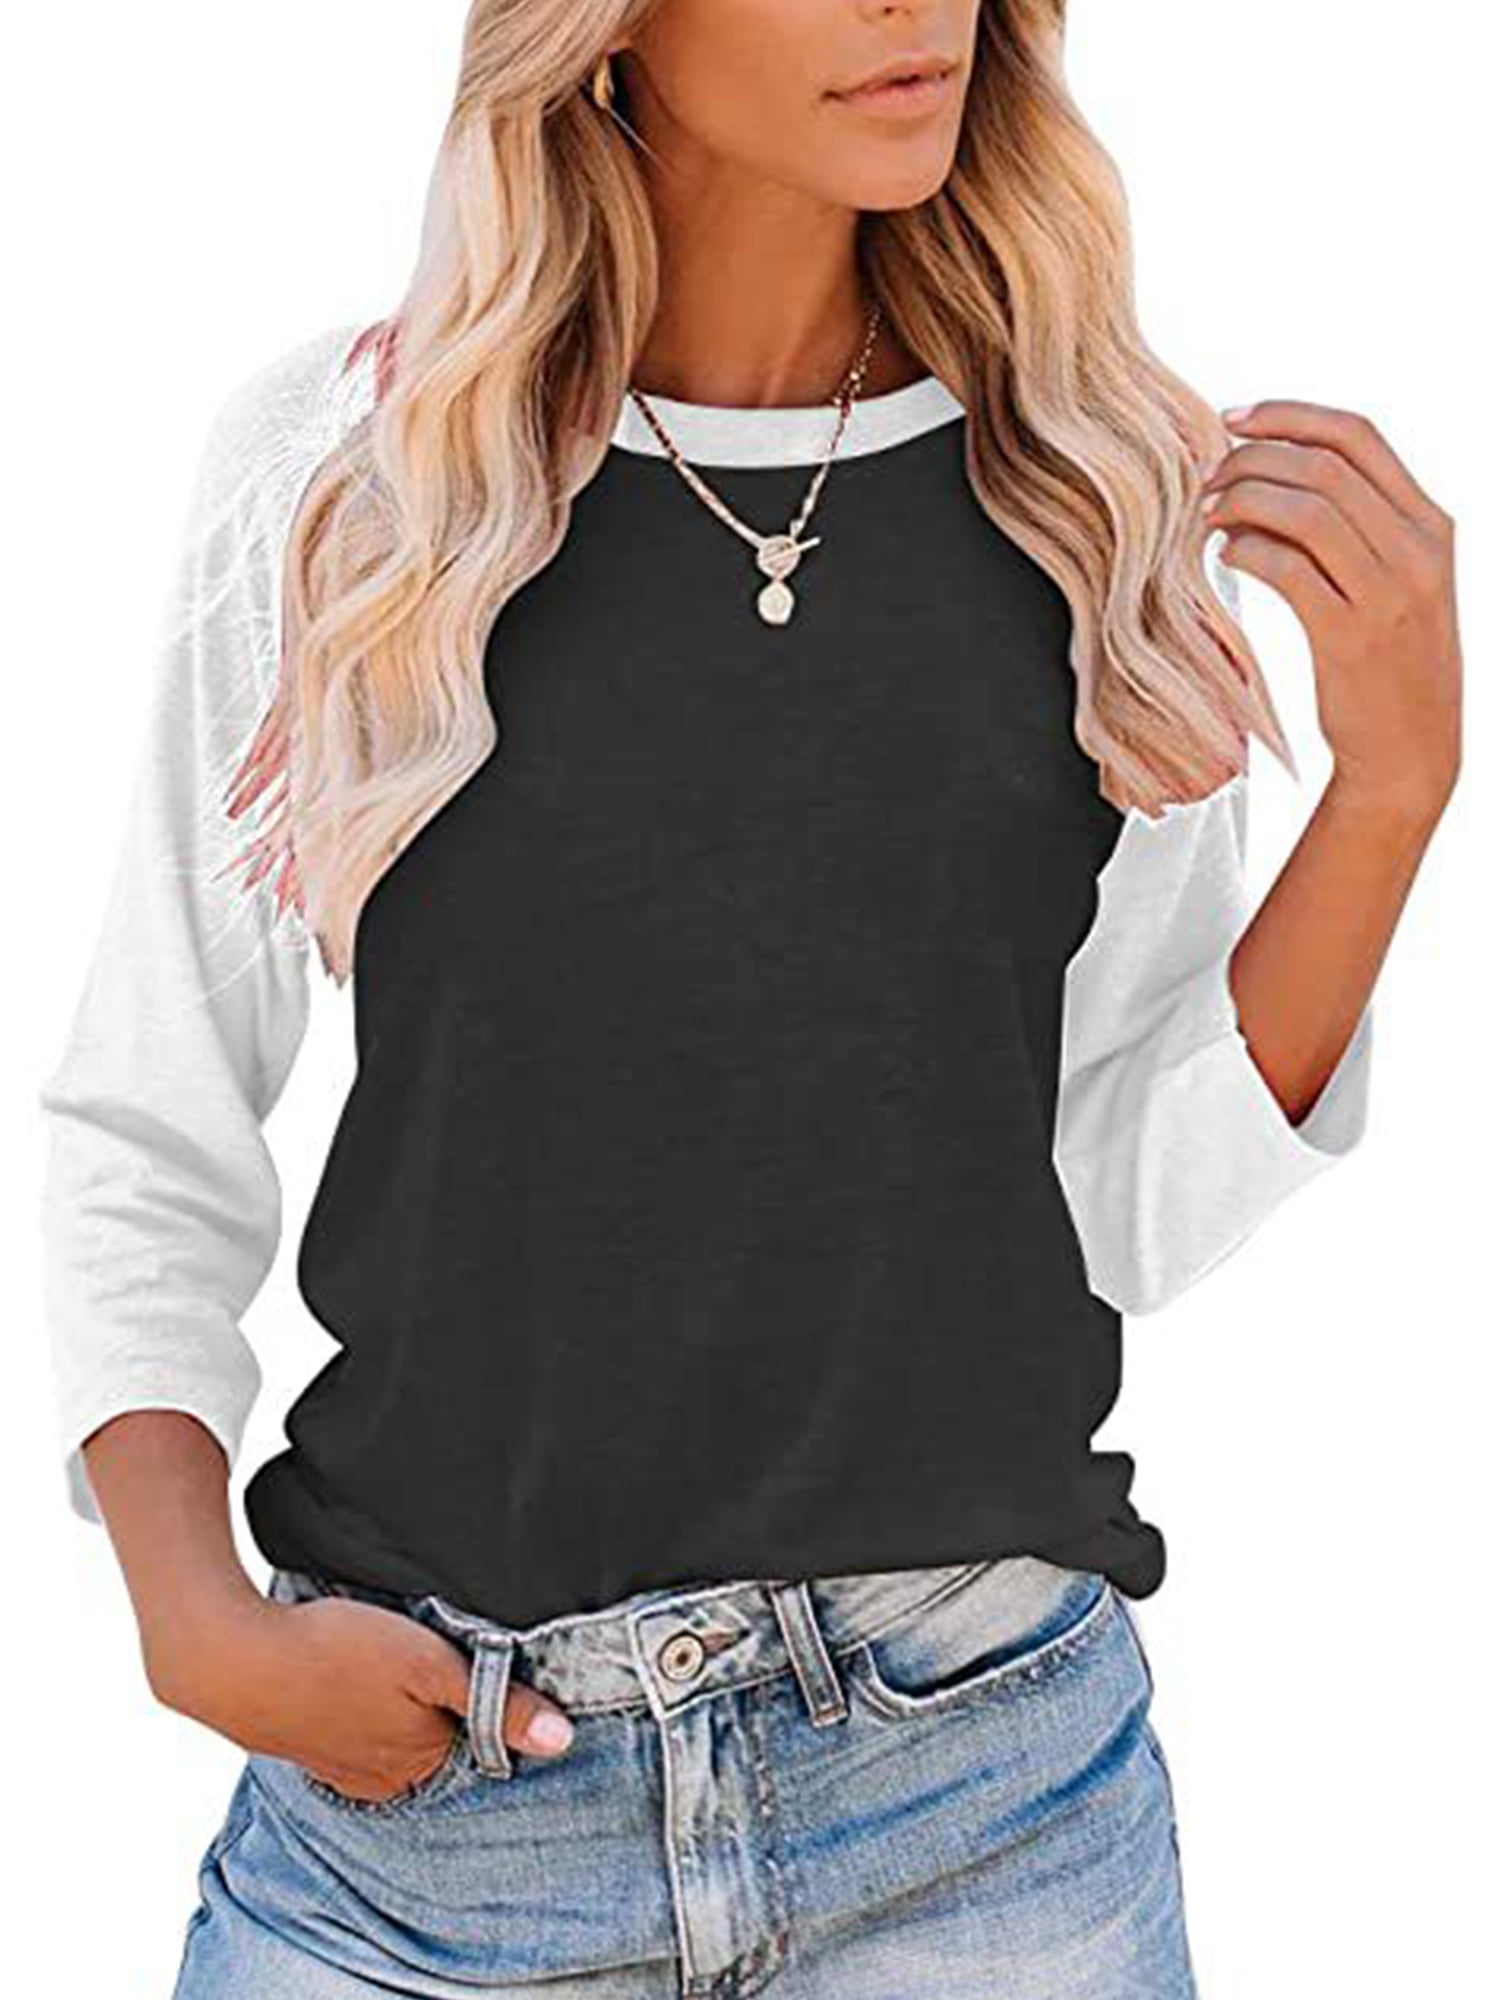 Eoeth Womens Triple Color Block Splice T-Shirts Leisure Simple Wild O-Neck Long Sleeve Blouse Tops Shirts Pullover Tee 